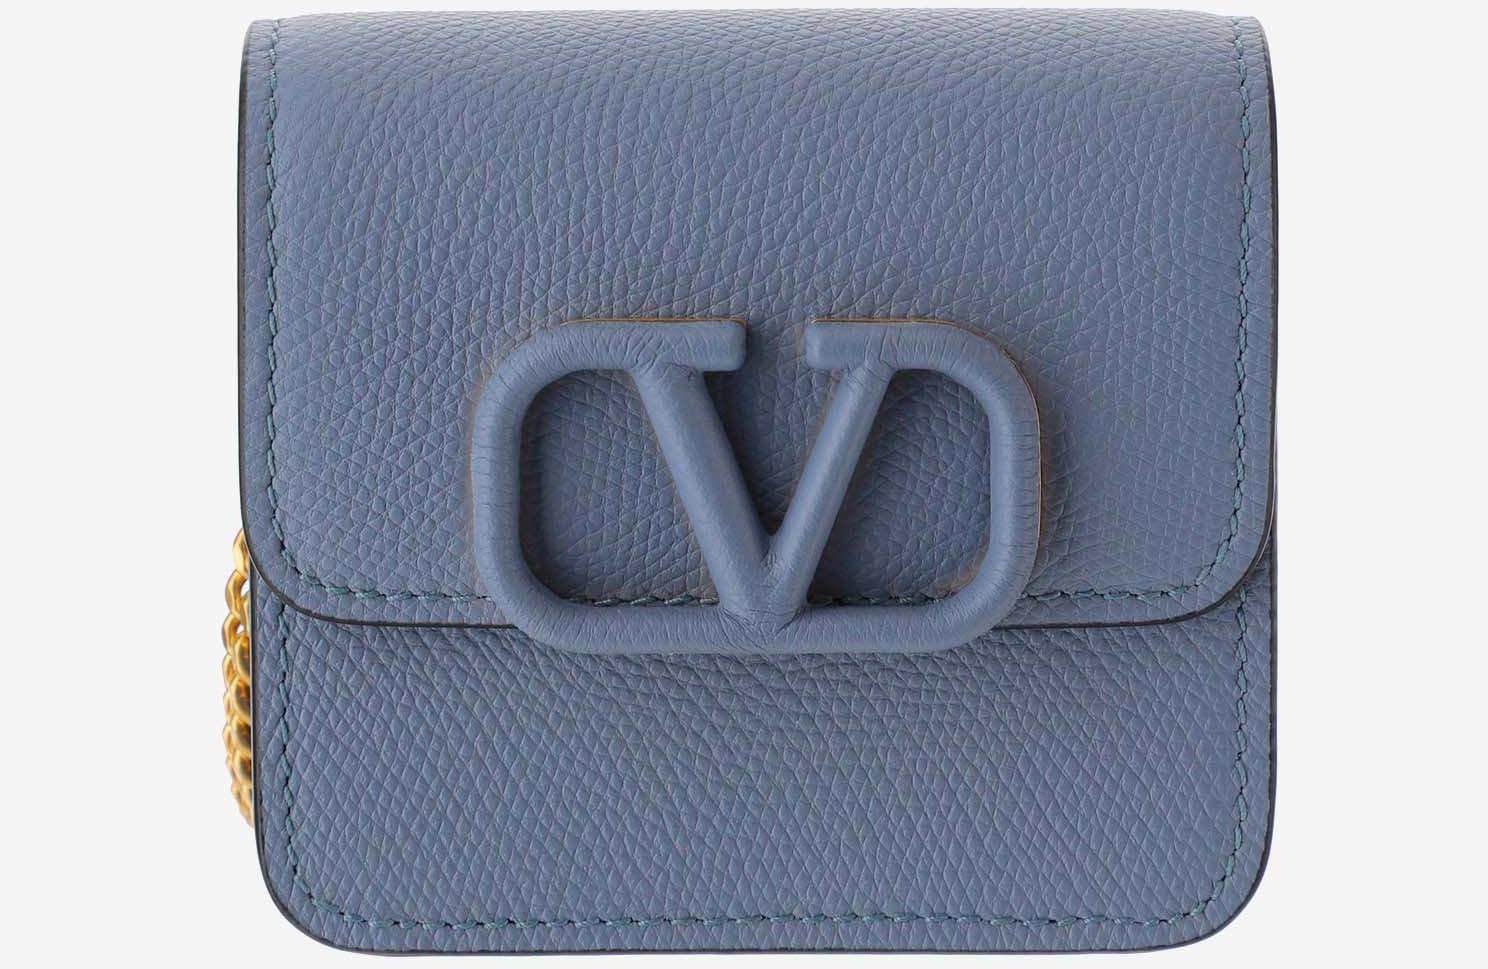 Vlogo Signature Metallic Grainy Calfskin Wallet With Chain for